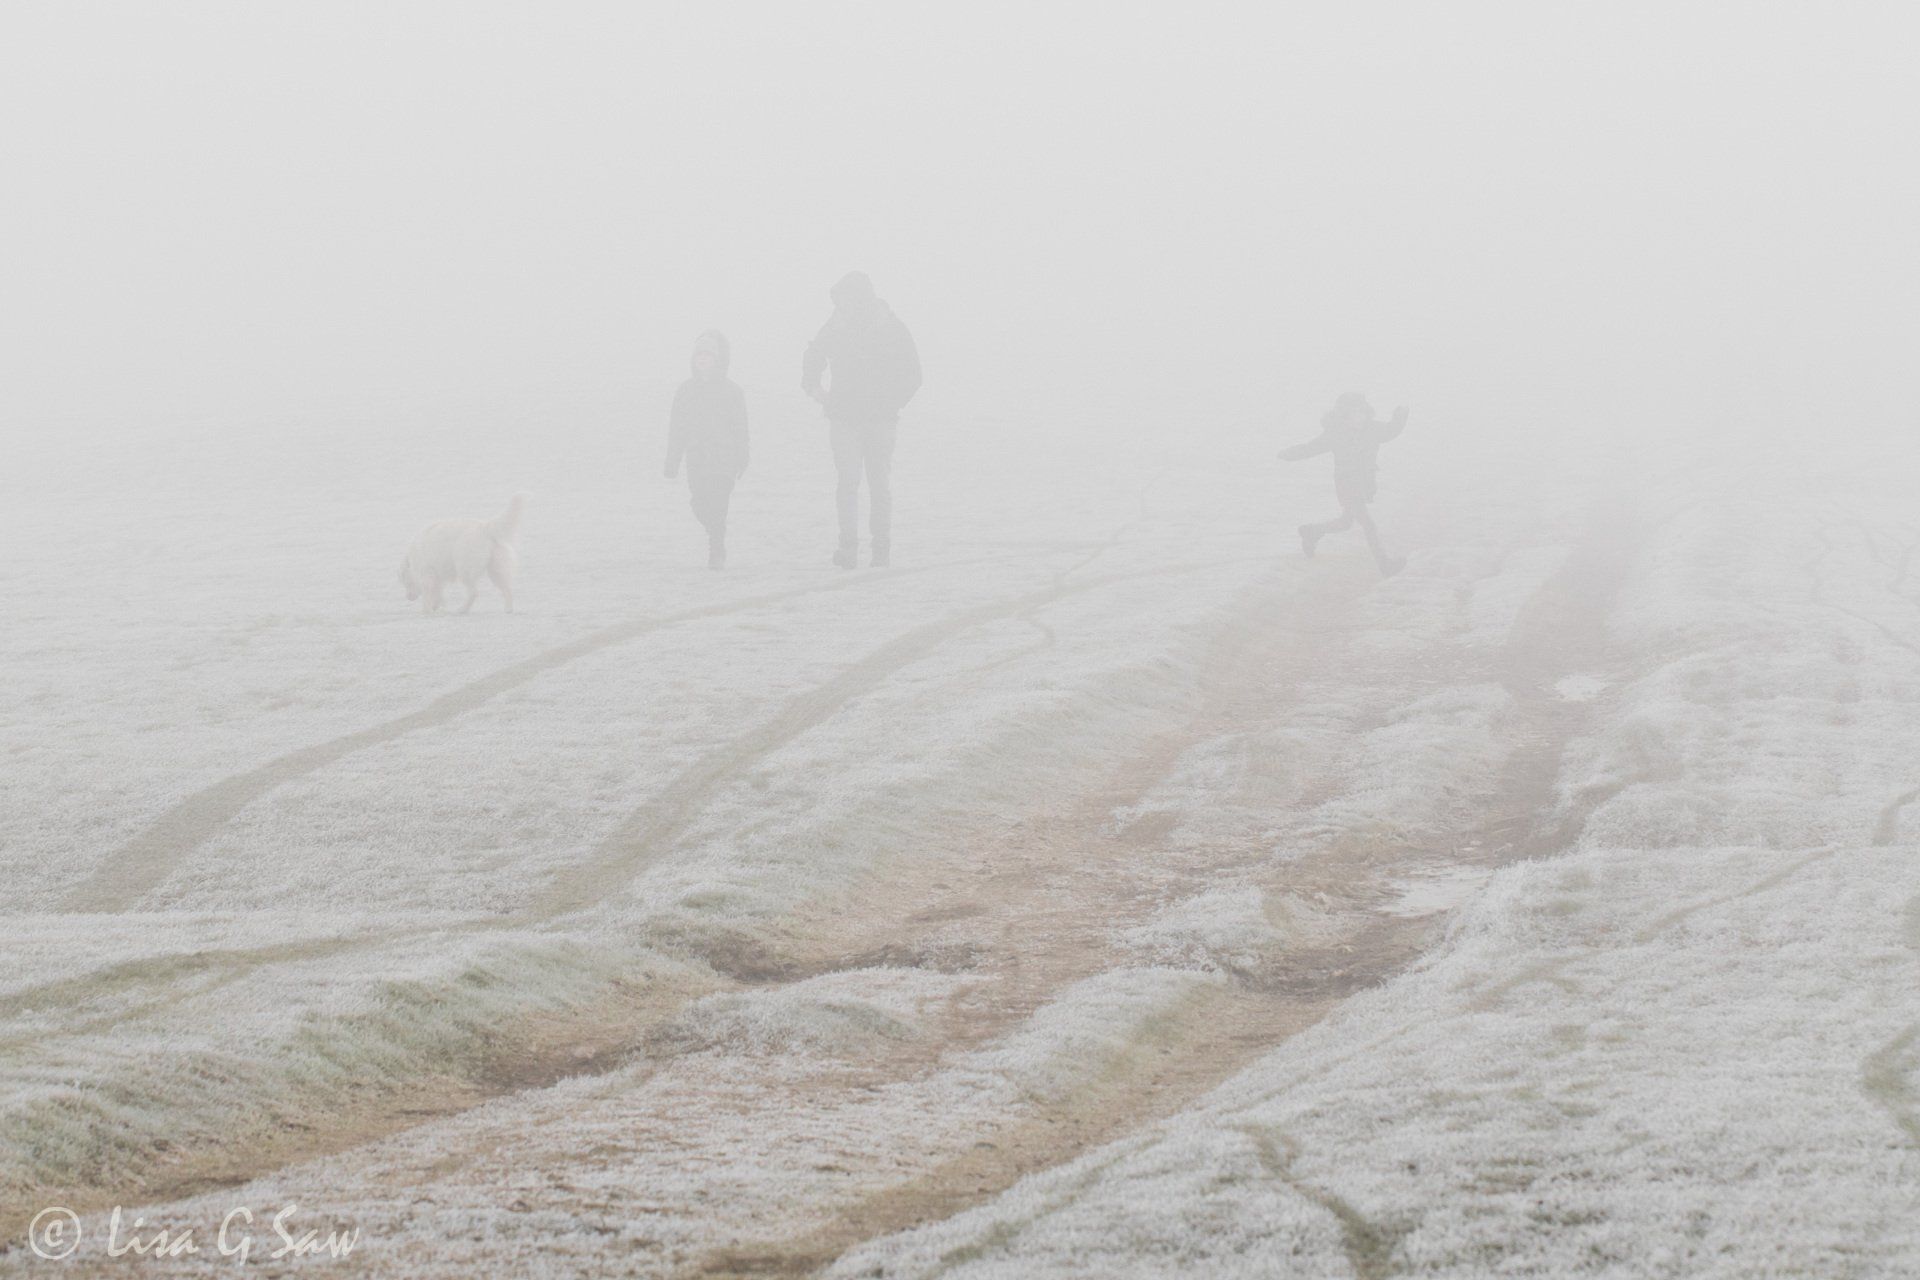 Family and dog walking, child leaping, in mist on frosty morning